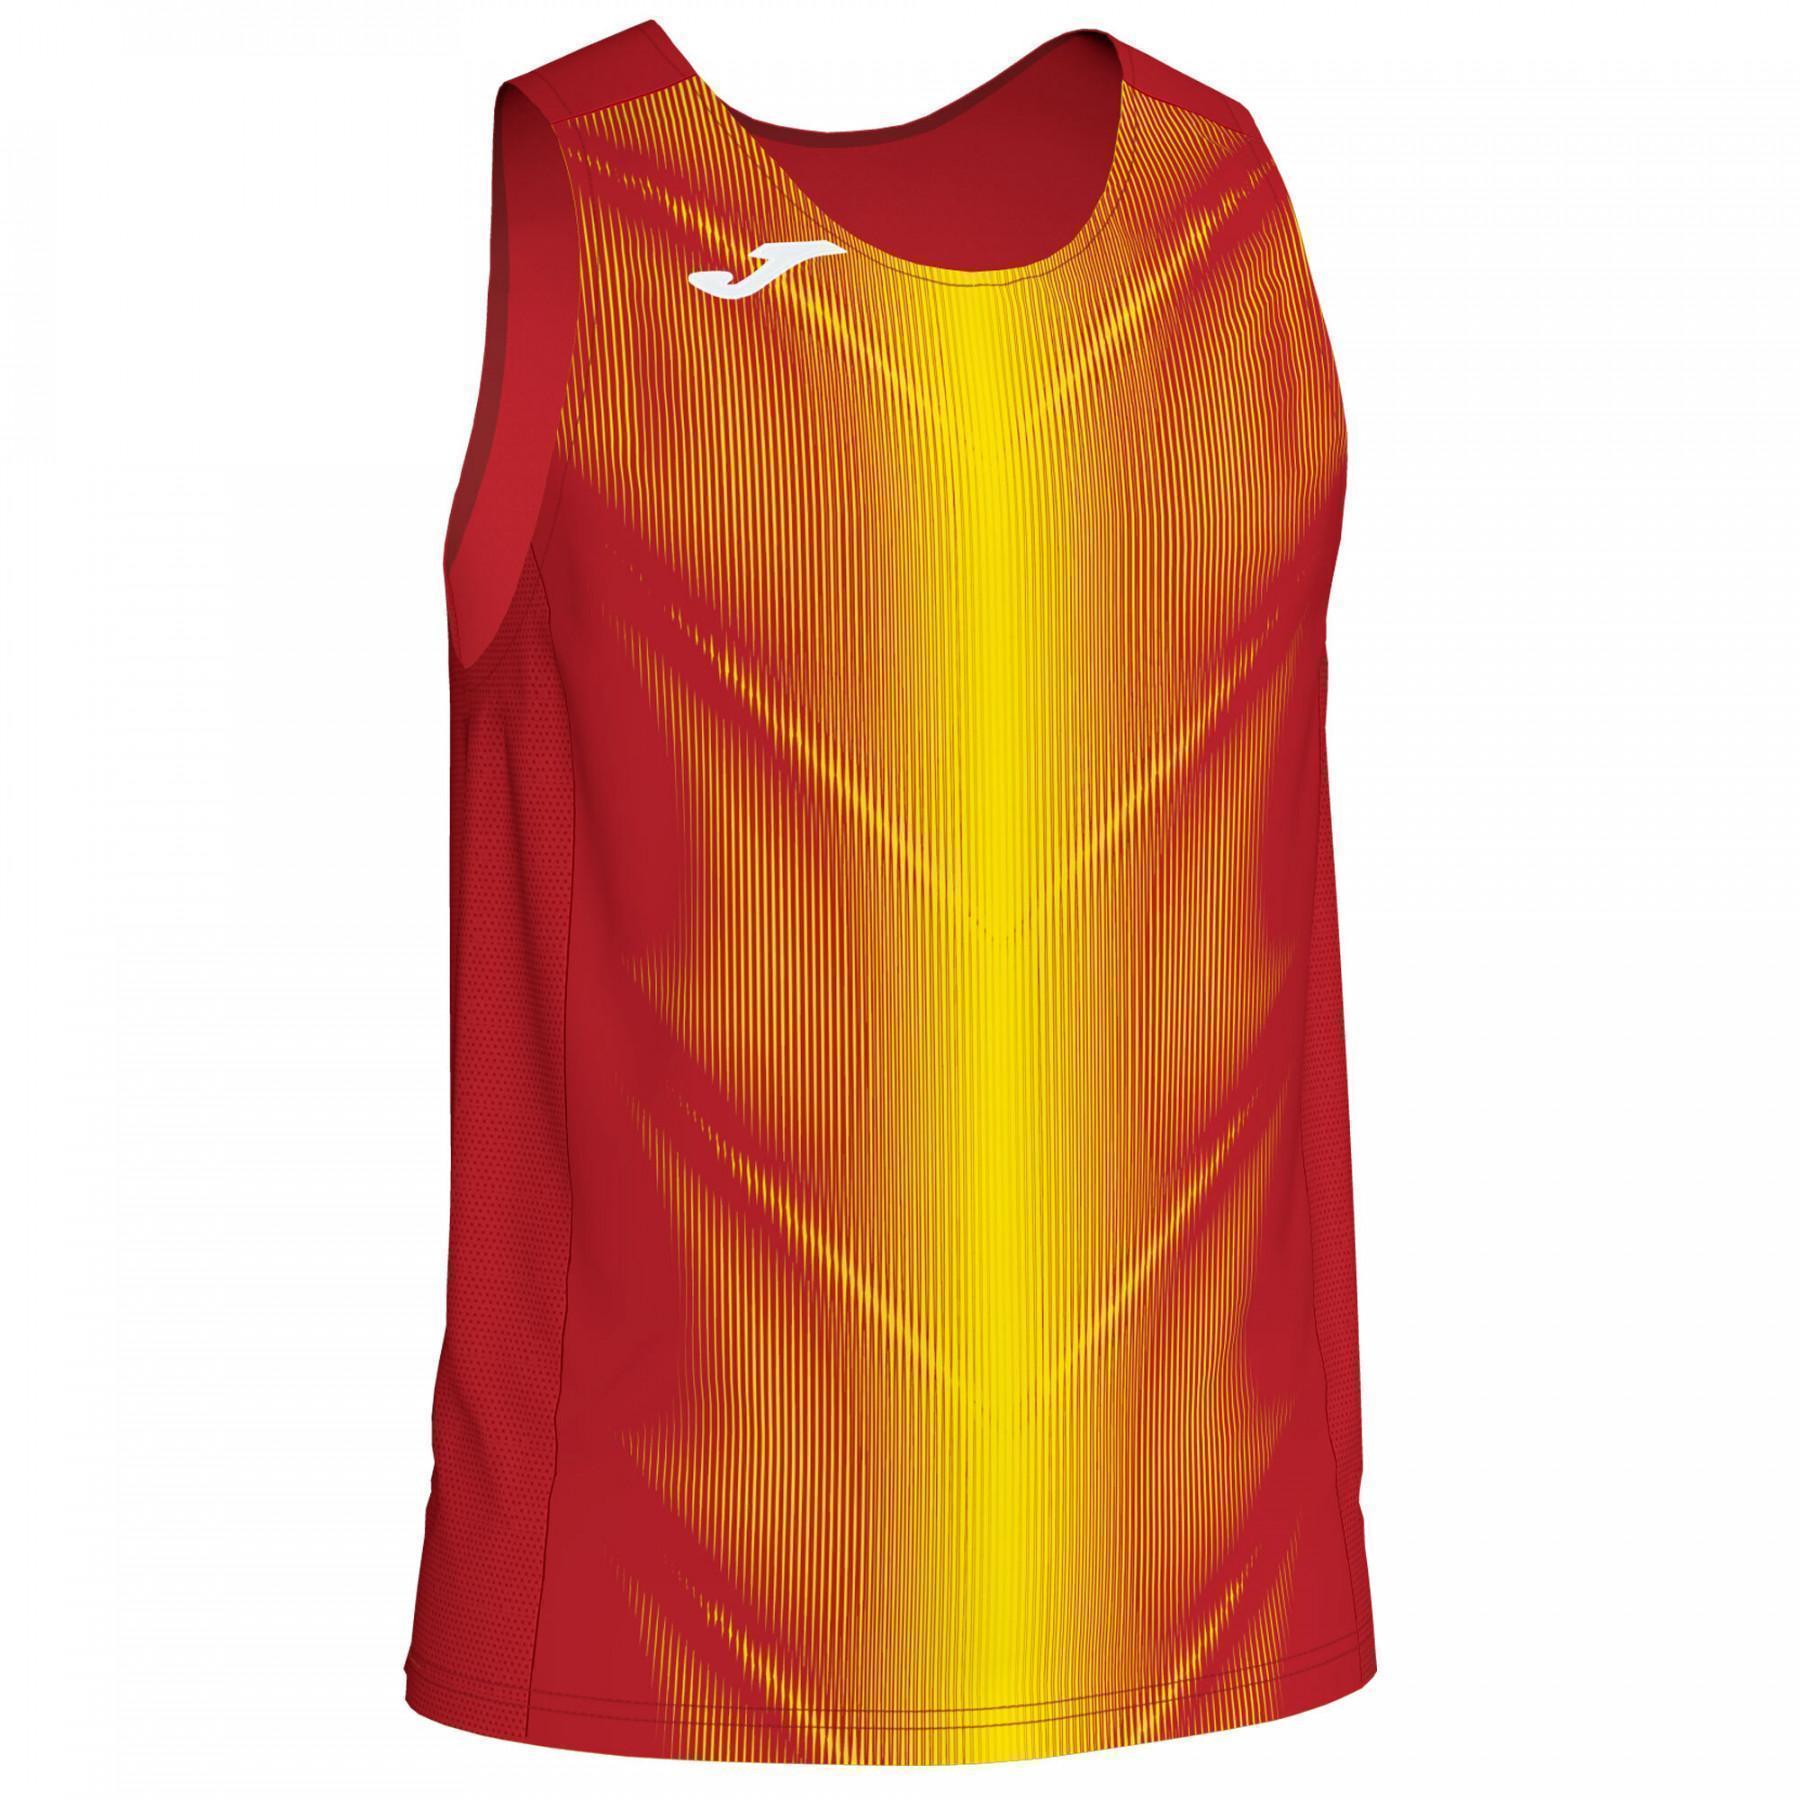 Maillot SM Joma Olympie